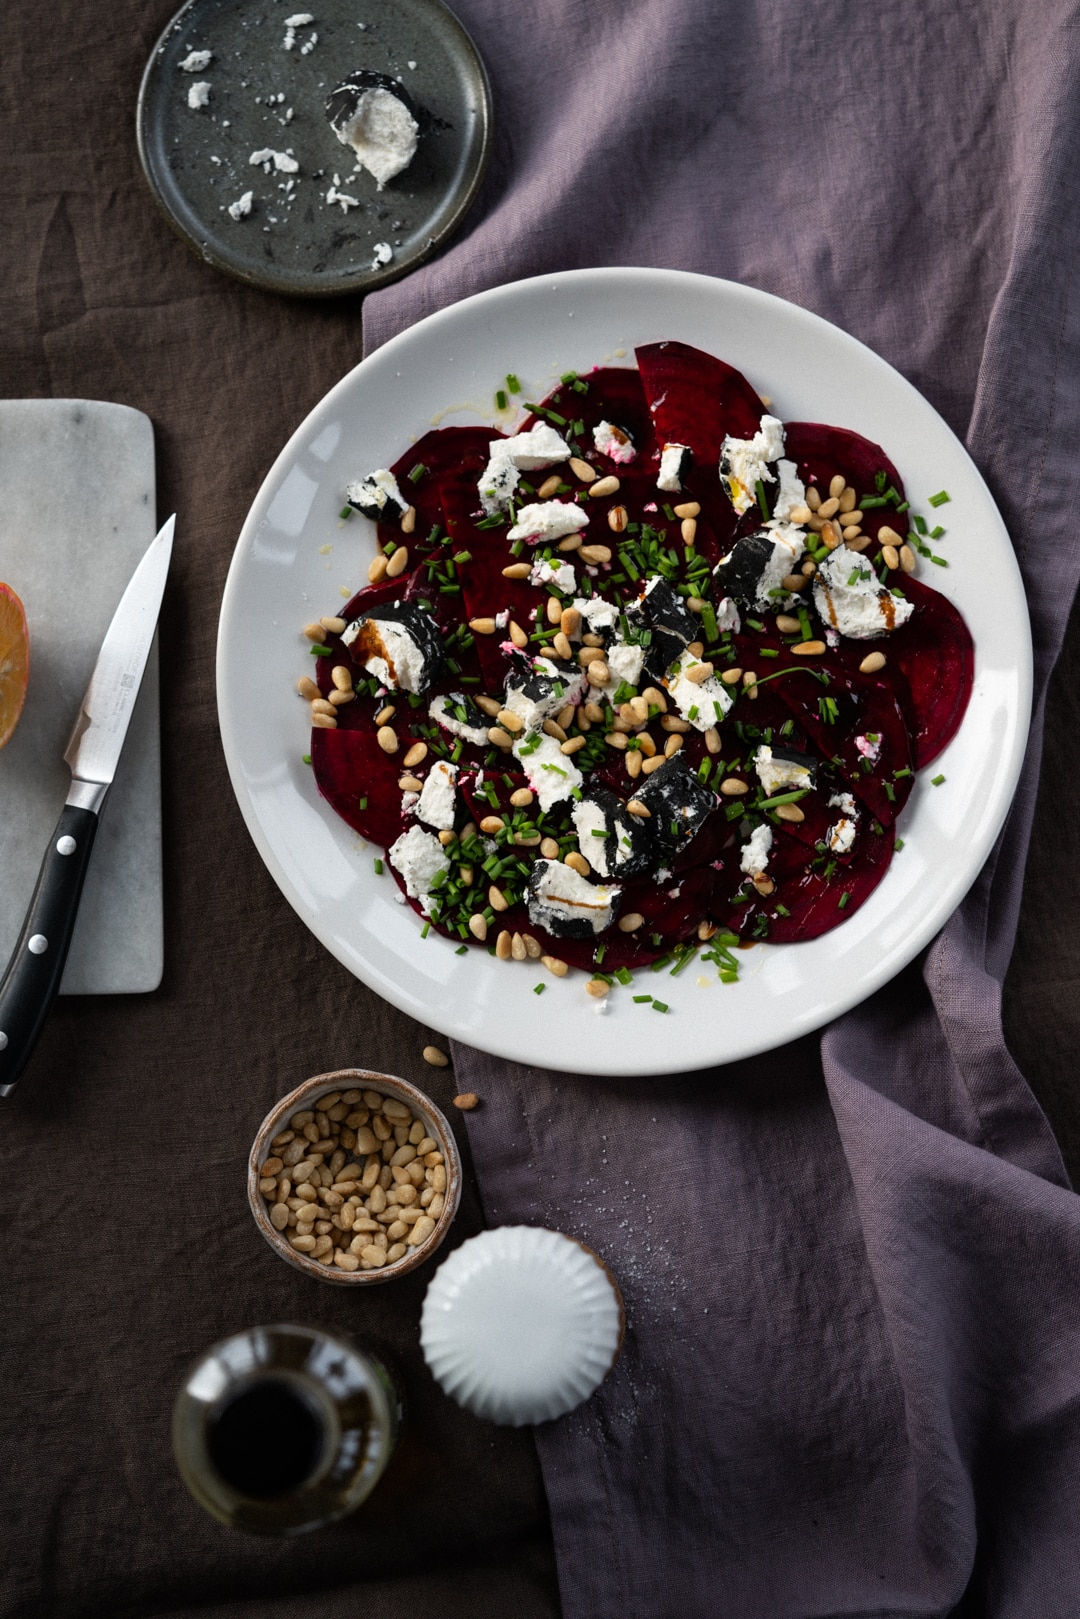 Crunchy Beet Salad With Goat Cheese And Pine Nuts